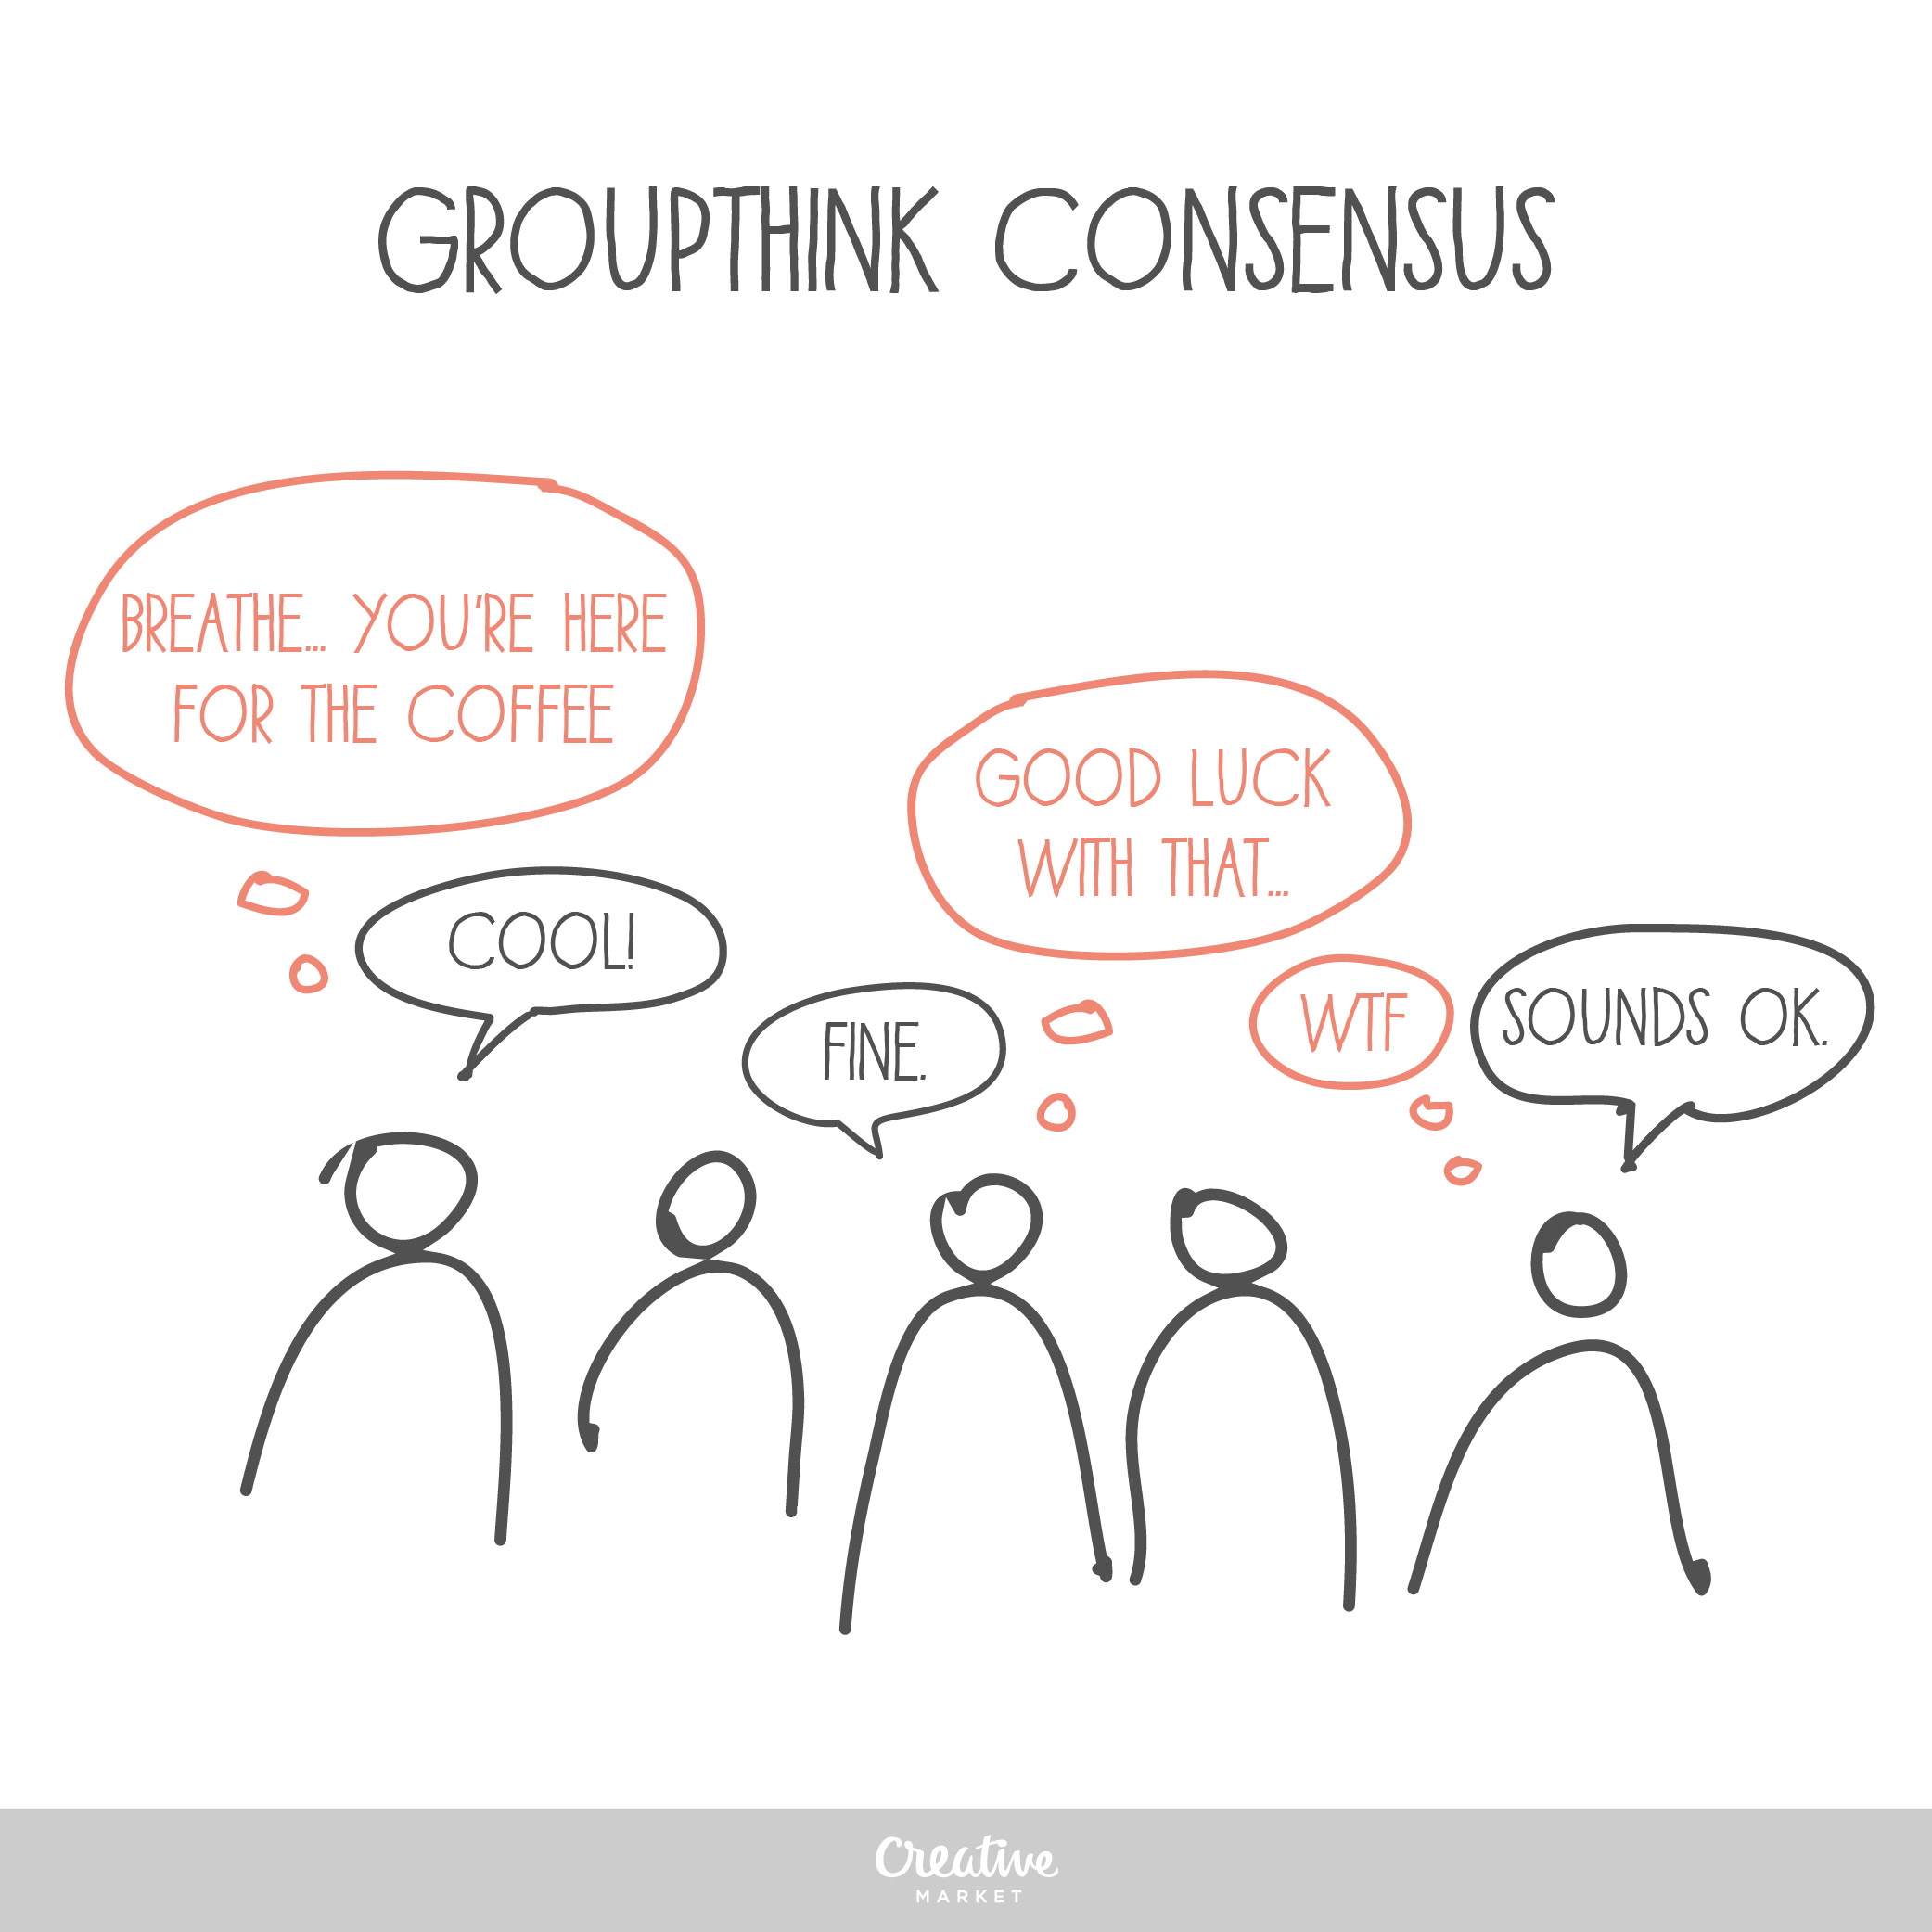 Groupthink: Definition, Signs, Examples, and How to Avoid It